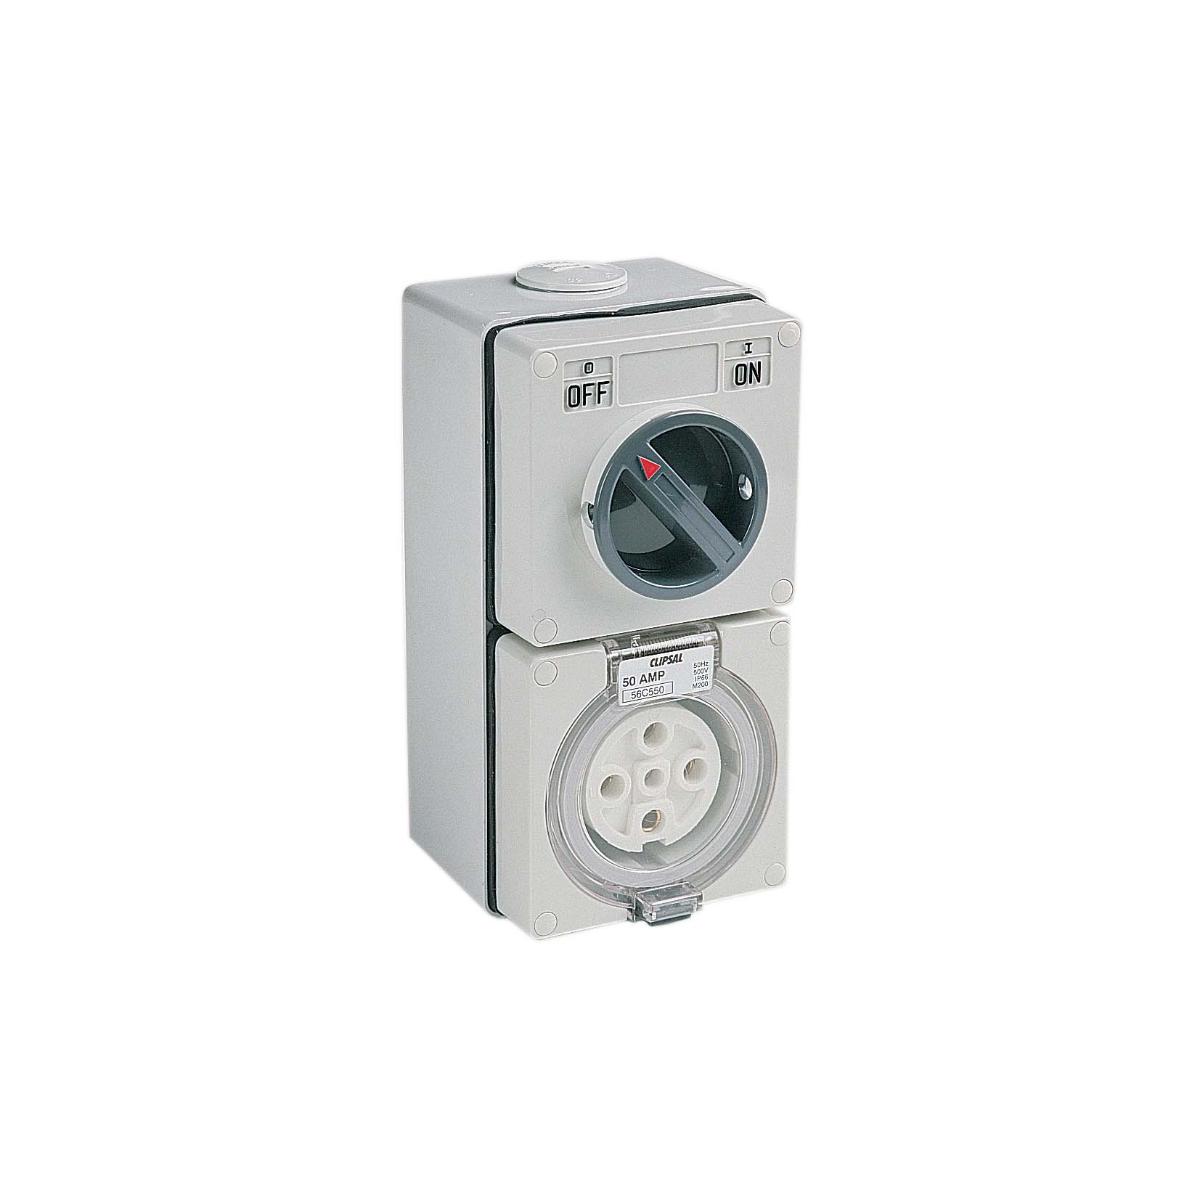 OUTLET SWITCHED IP66 5PIN 50A 500V GREY